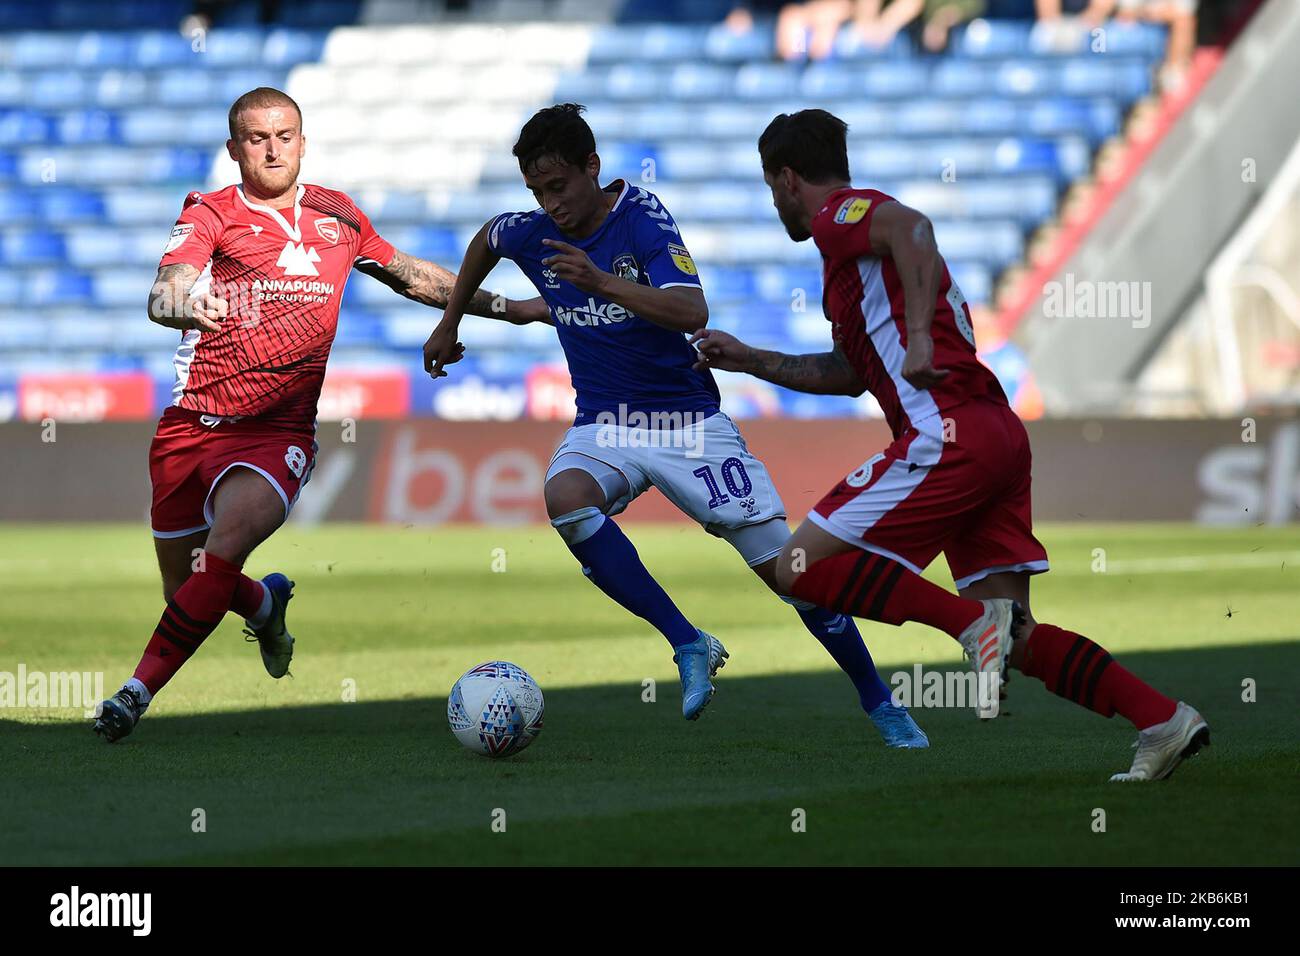 Oldham's Mohamed Maouche and Morecambe's Lewis Alessandra in action during the Sky Bet League 2 match between Oldham Athletic and Morecambe at Boundary Park, Oldham on Saturday 21st September 2019. (Photo by Eddie Garvey/MI News/NurPhoto) Stock Photo